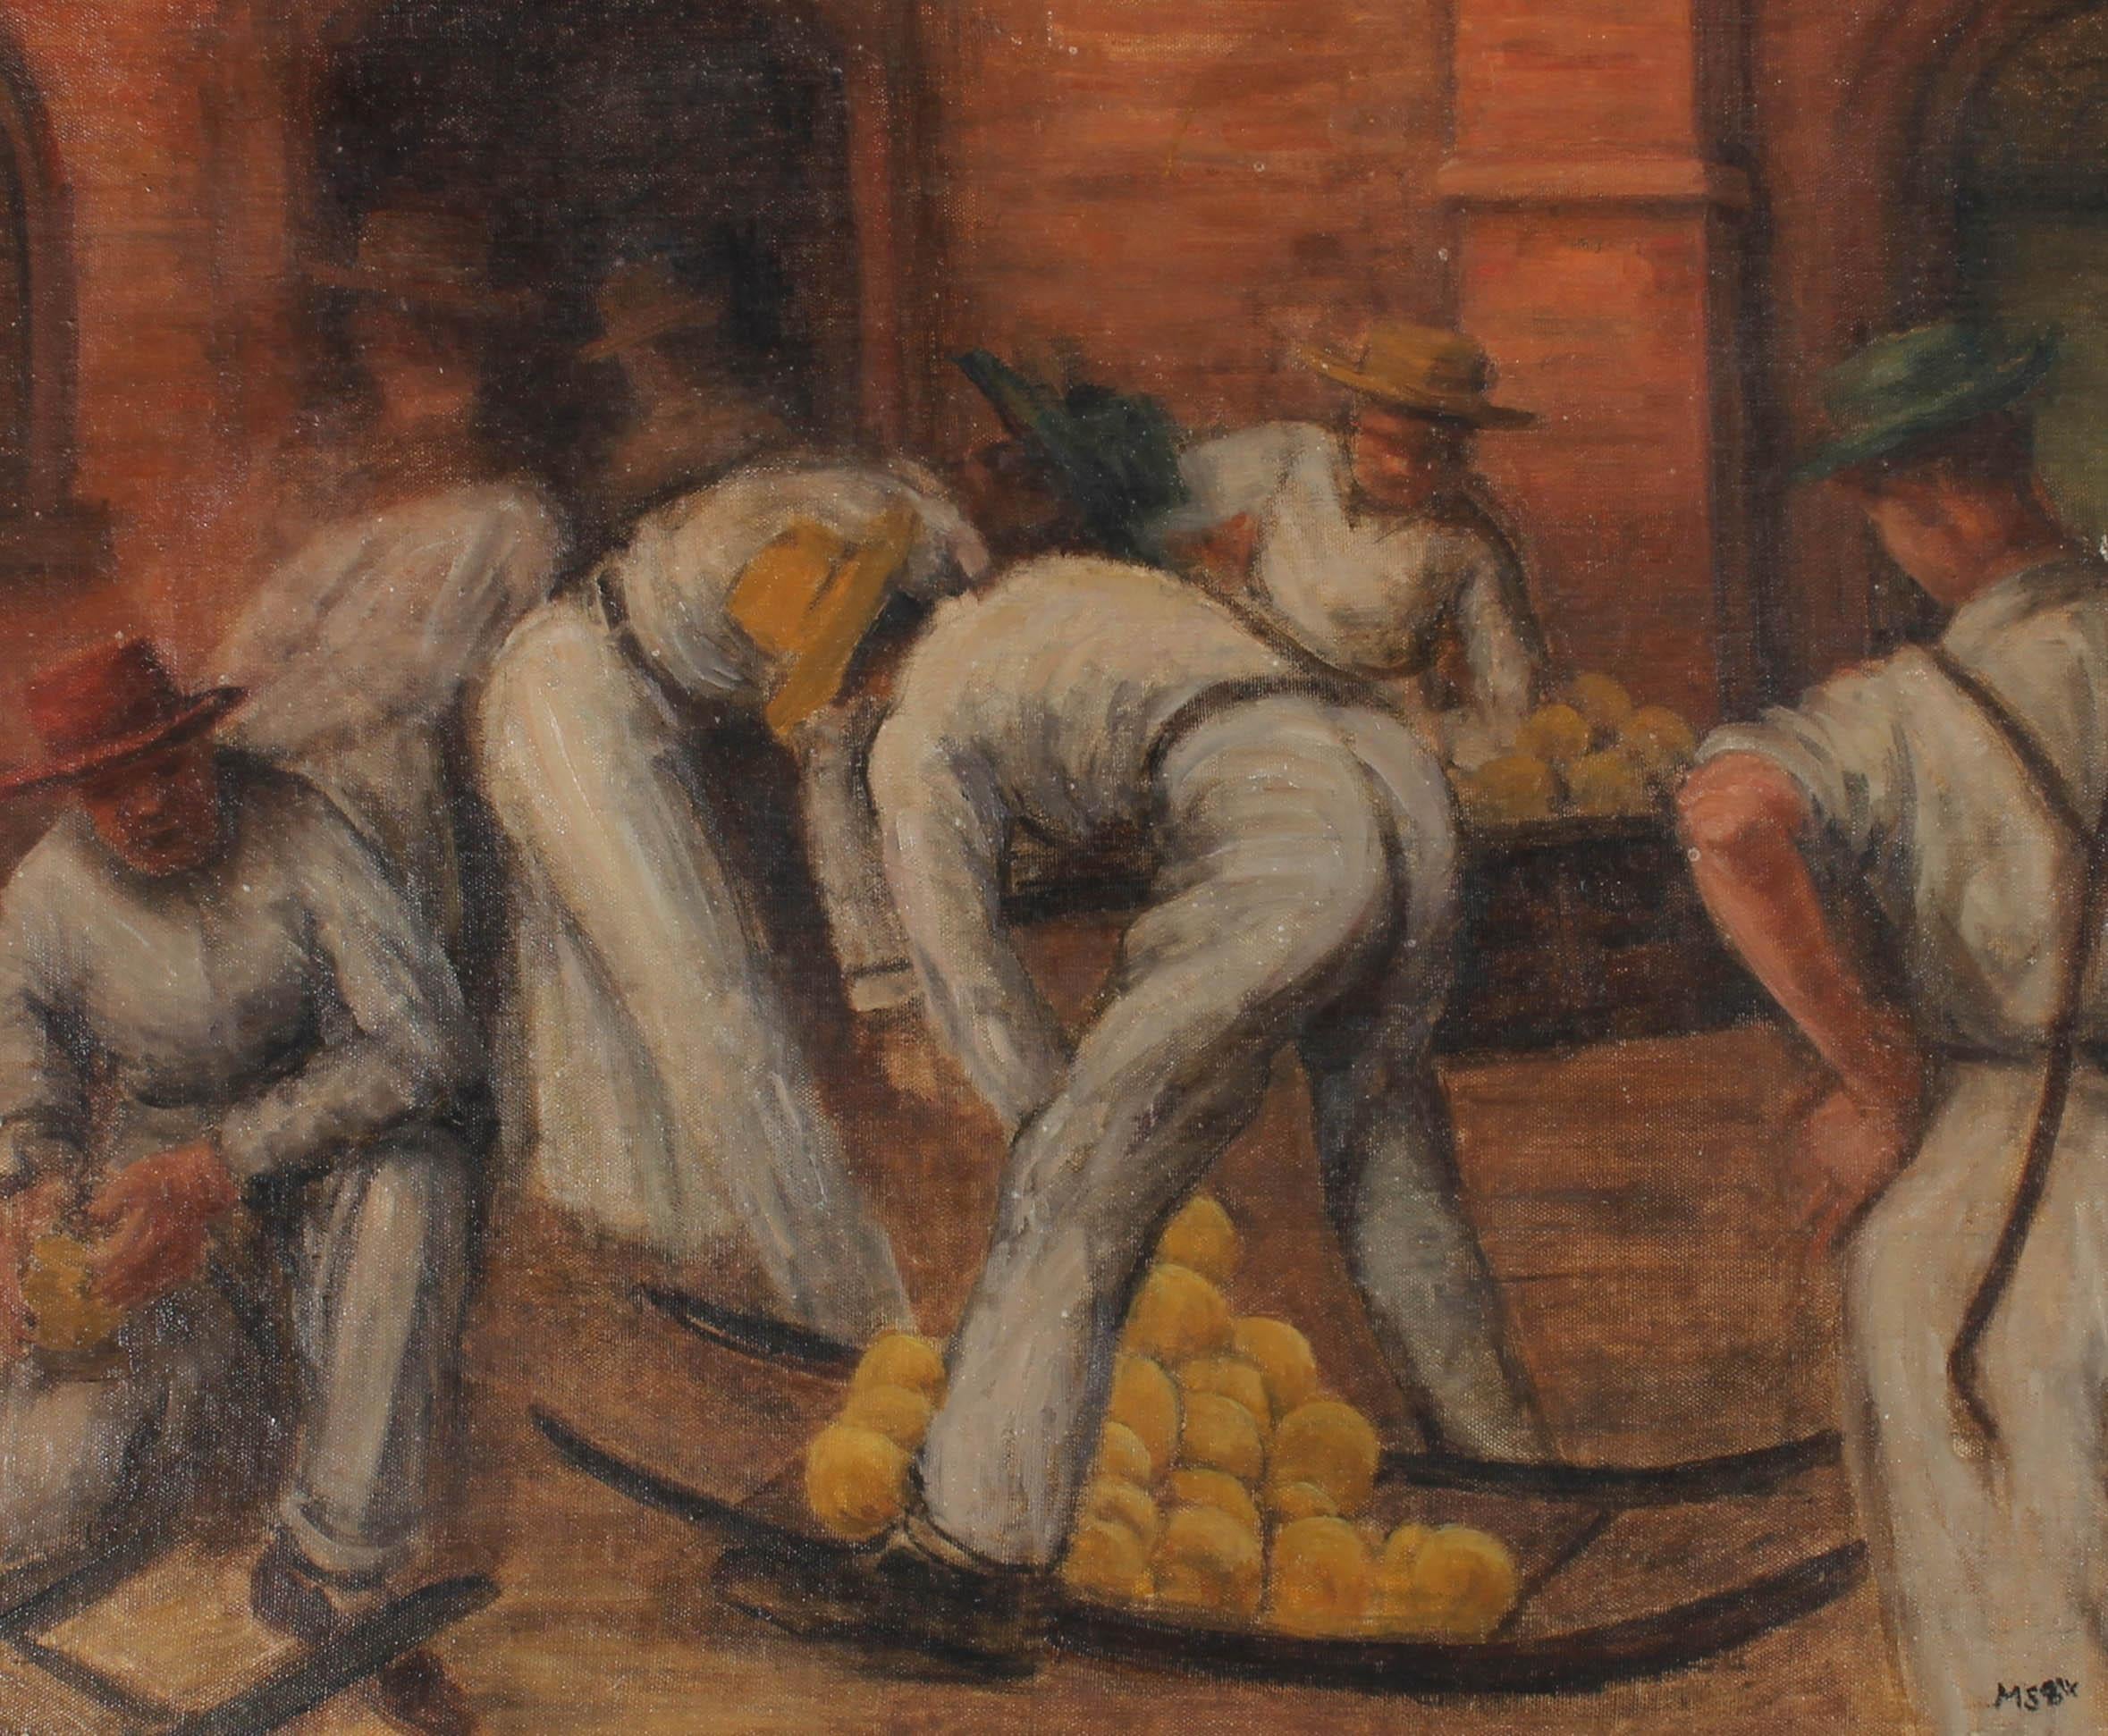 A dynamic 20th Century oil scene showing a group of cheesemakers in Amsterdam stacking up wheels of yellow cheese onto sledges. There is wonderful industrial movement in the painting with loose brushwork and suggestive areas of light and dark adding